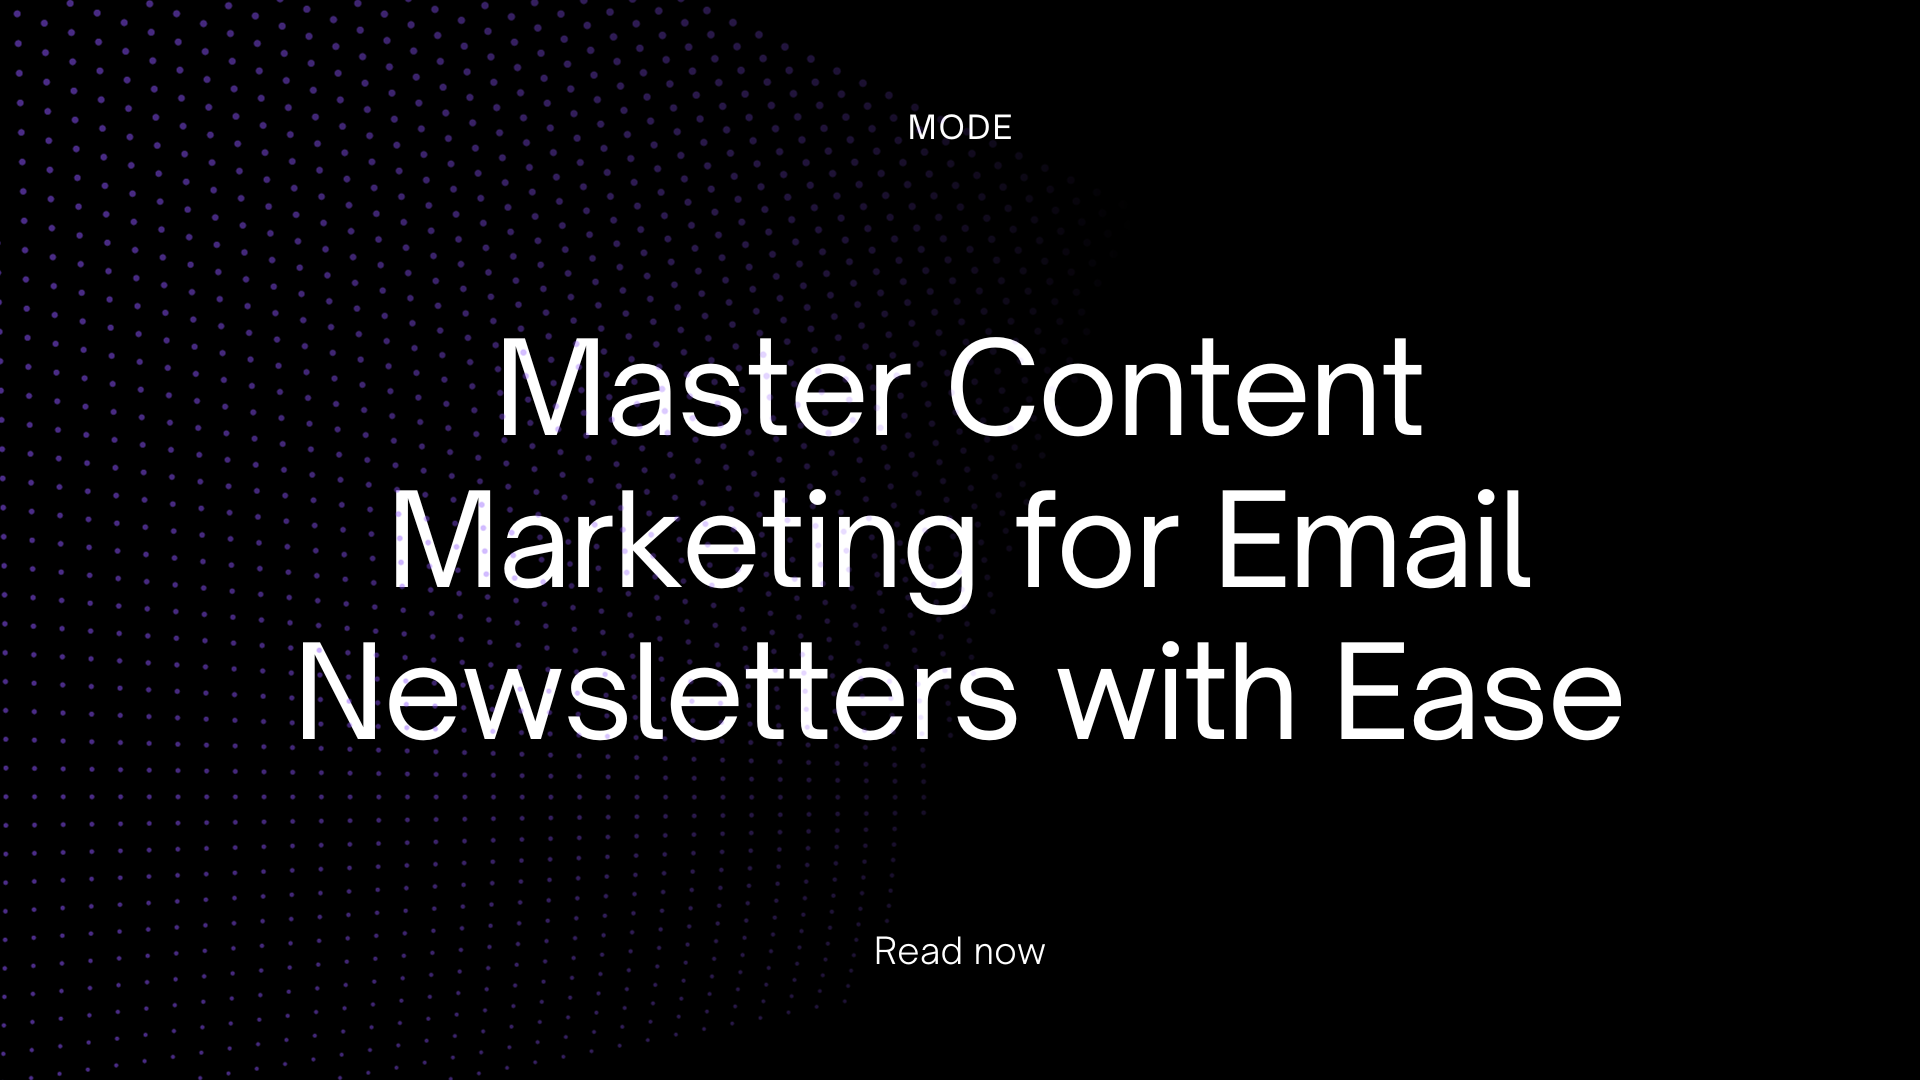 Master Content Marketing for Email Newsletters with Ease